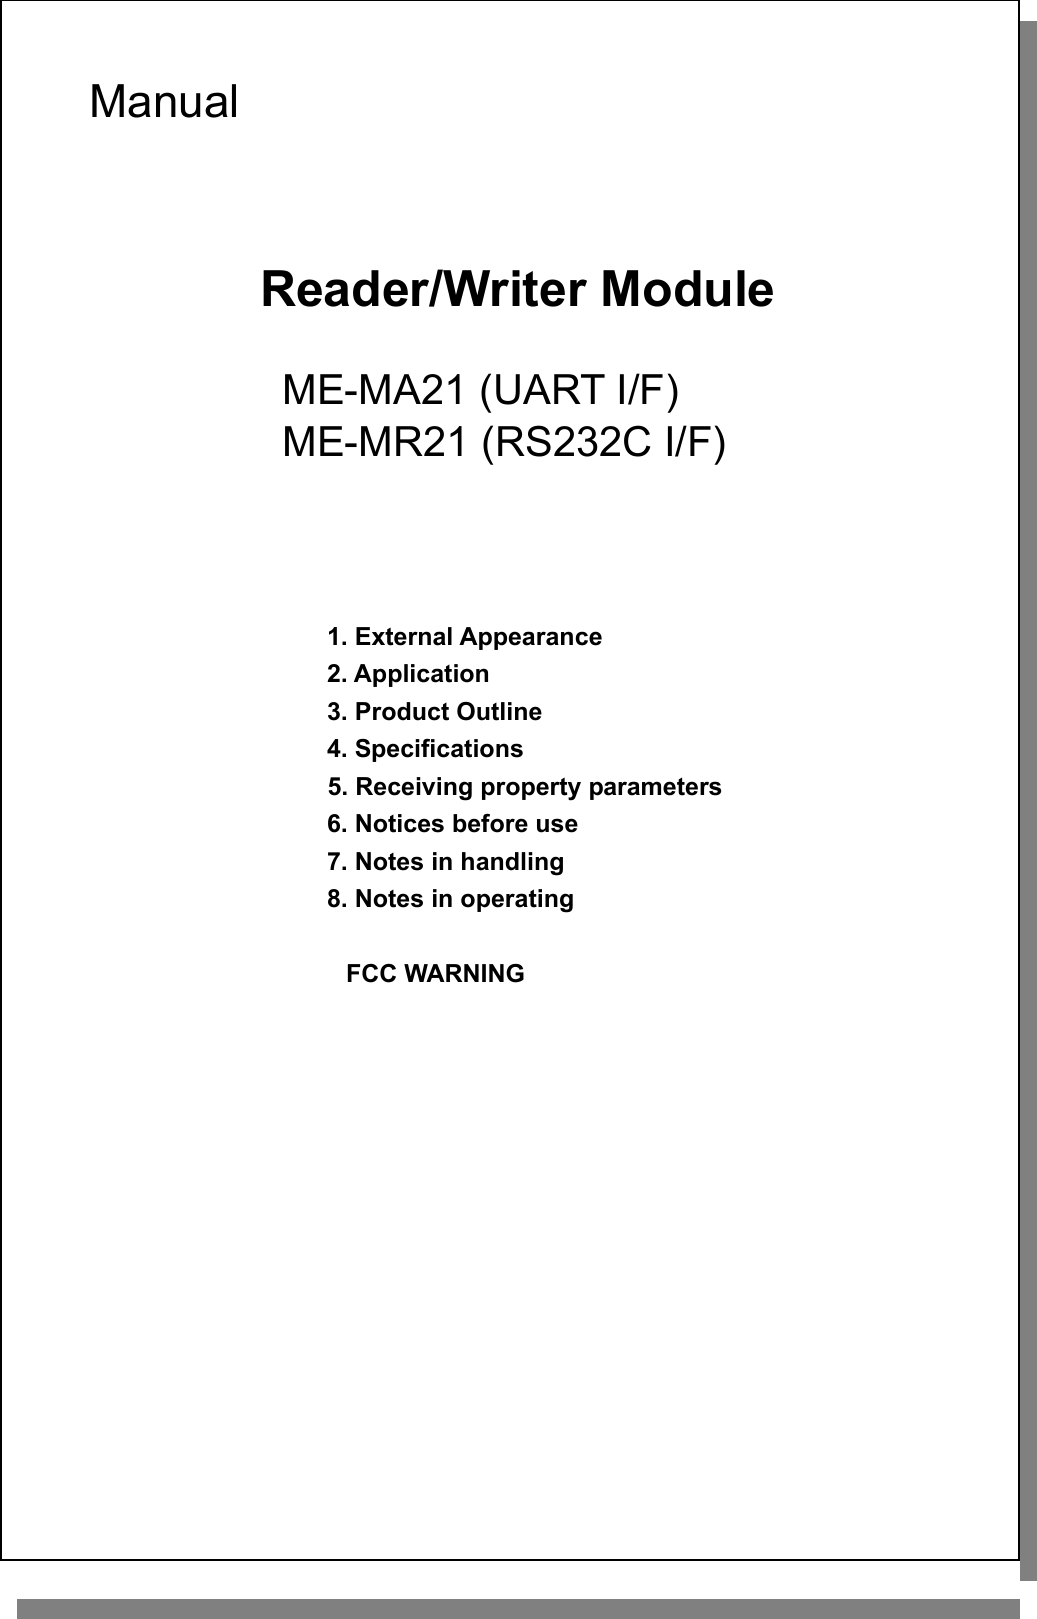    Manual    Reader/Writer Module   ME-MA21 (UART I/F)  ME-MR21 (RS232C I/F)     1. External Appearance 2. Application 3. Product Outline 4. Specifications 5. Receiving property parameters 6. Notices before use 7. Notes in handling 8. Notes in operating                       FCC WARNING               